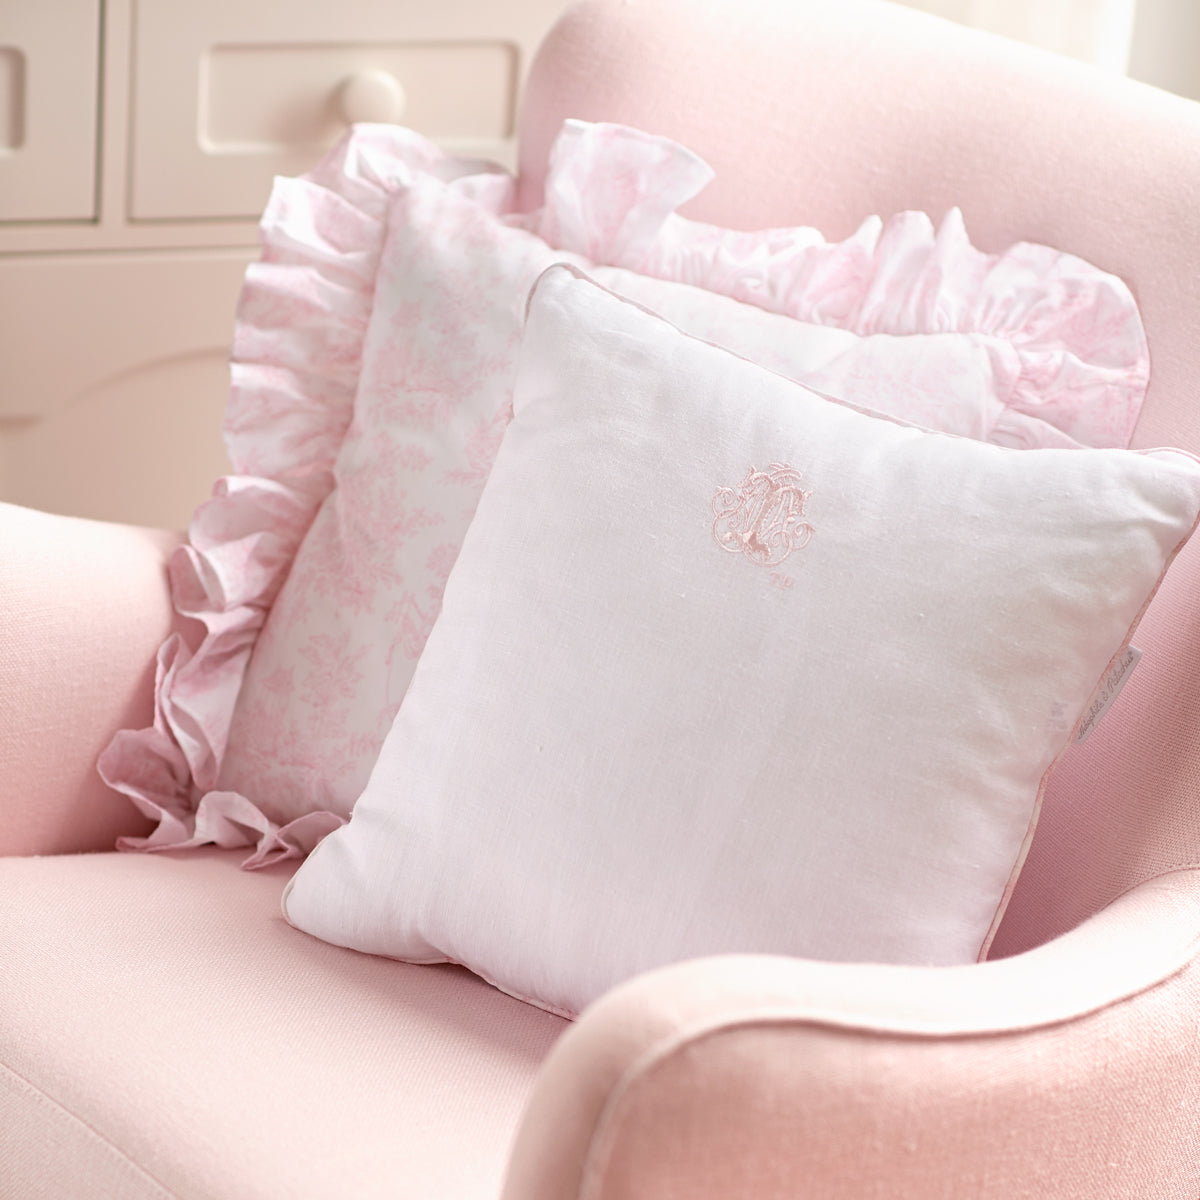 Theophile & Patachou Embroidered Cushion in Cotton - Sweet Pink